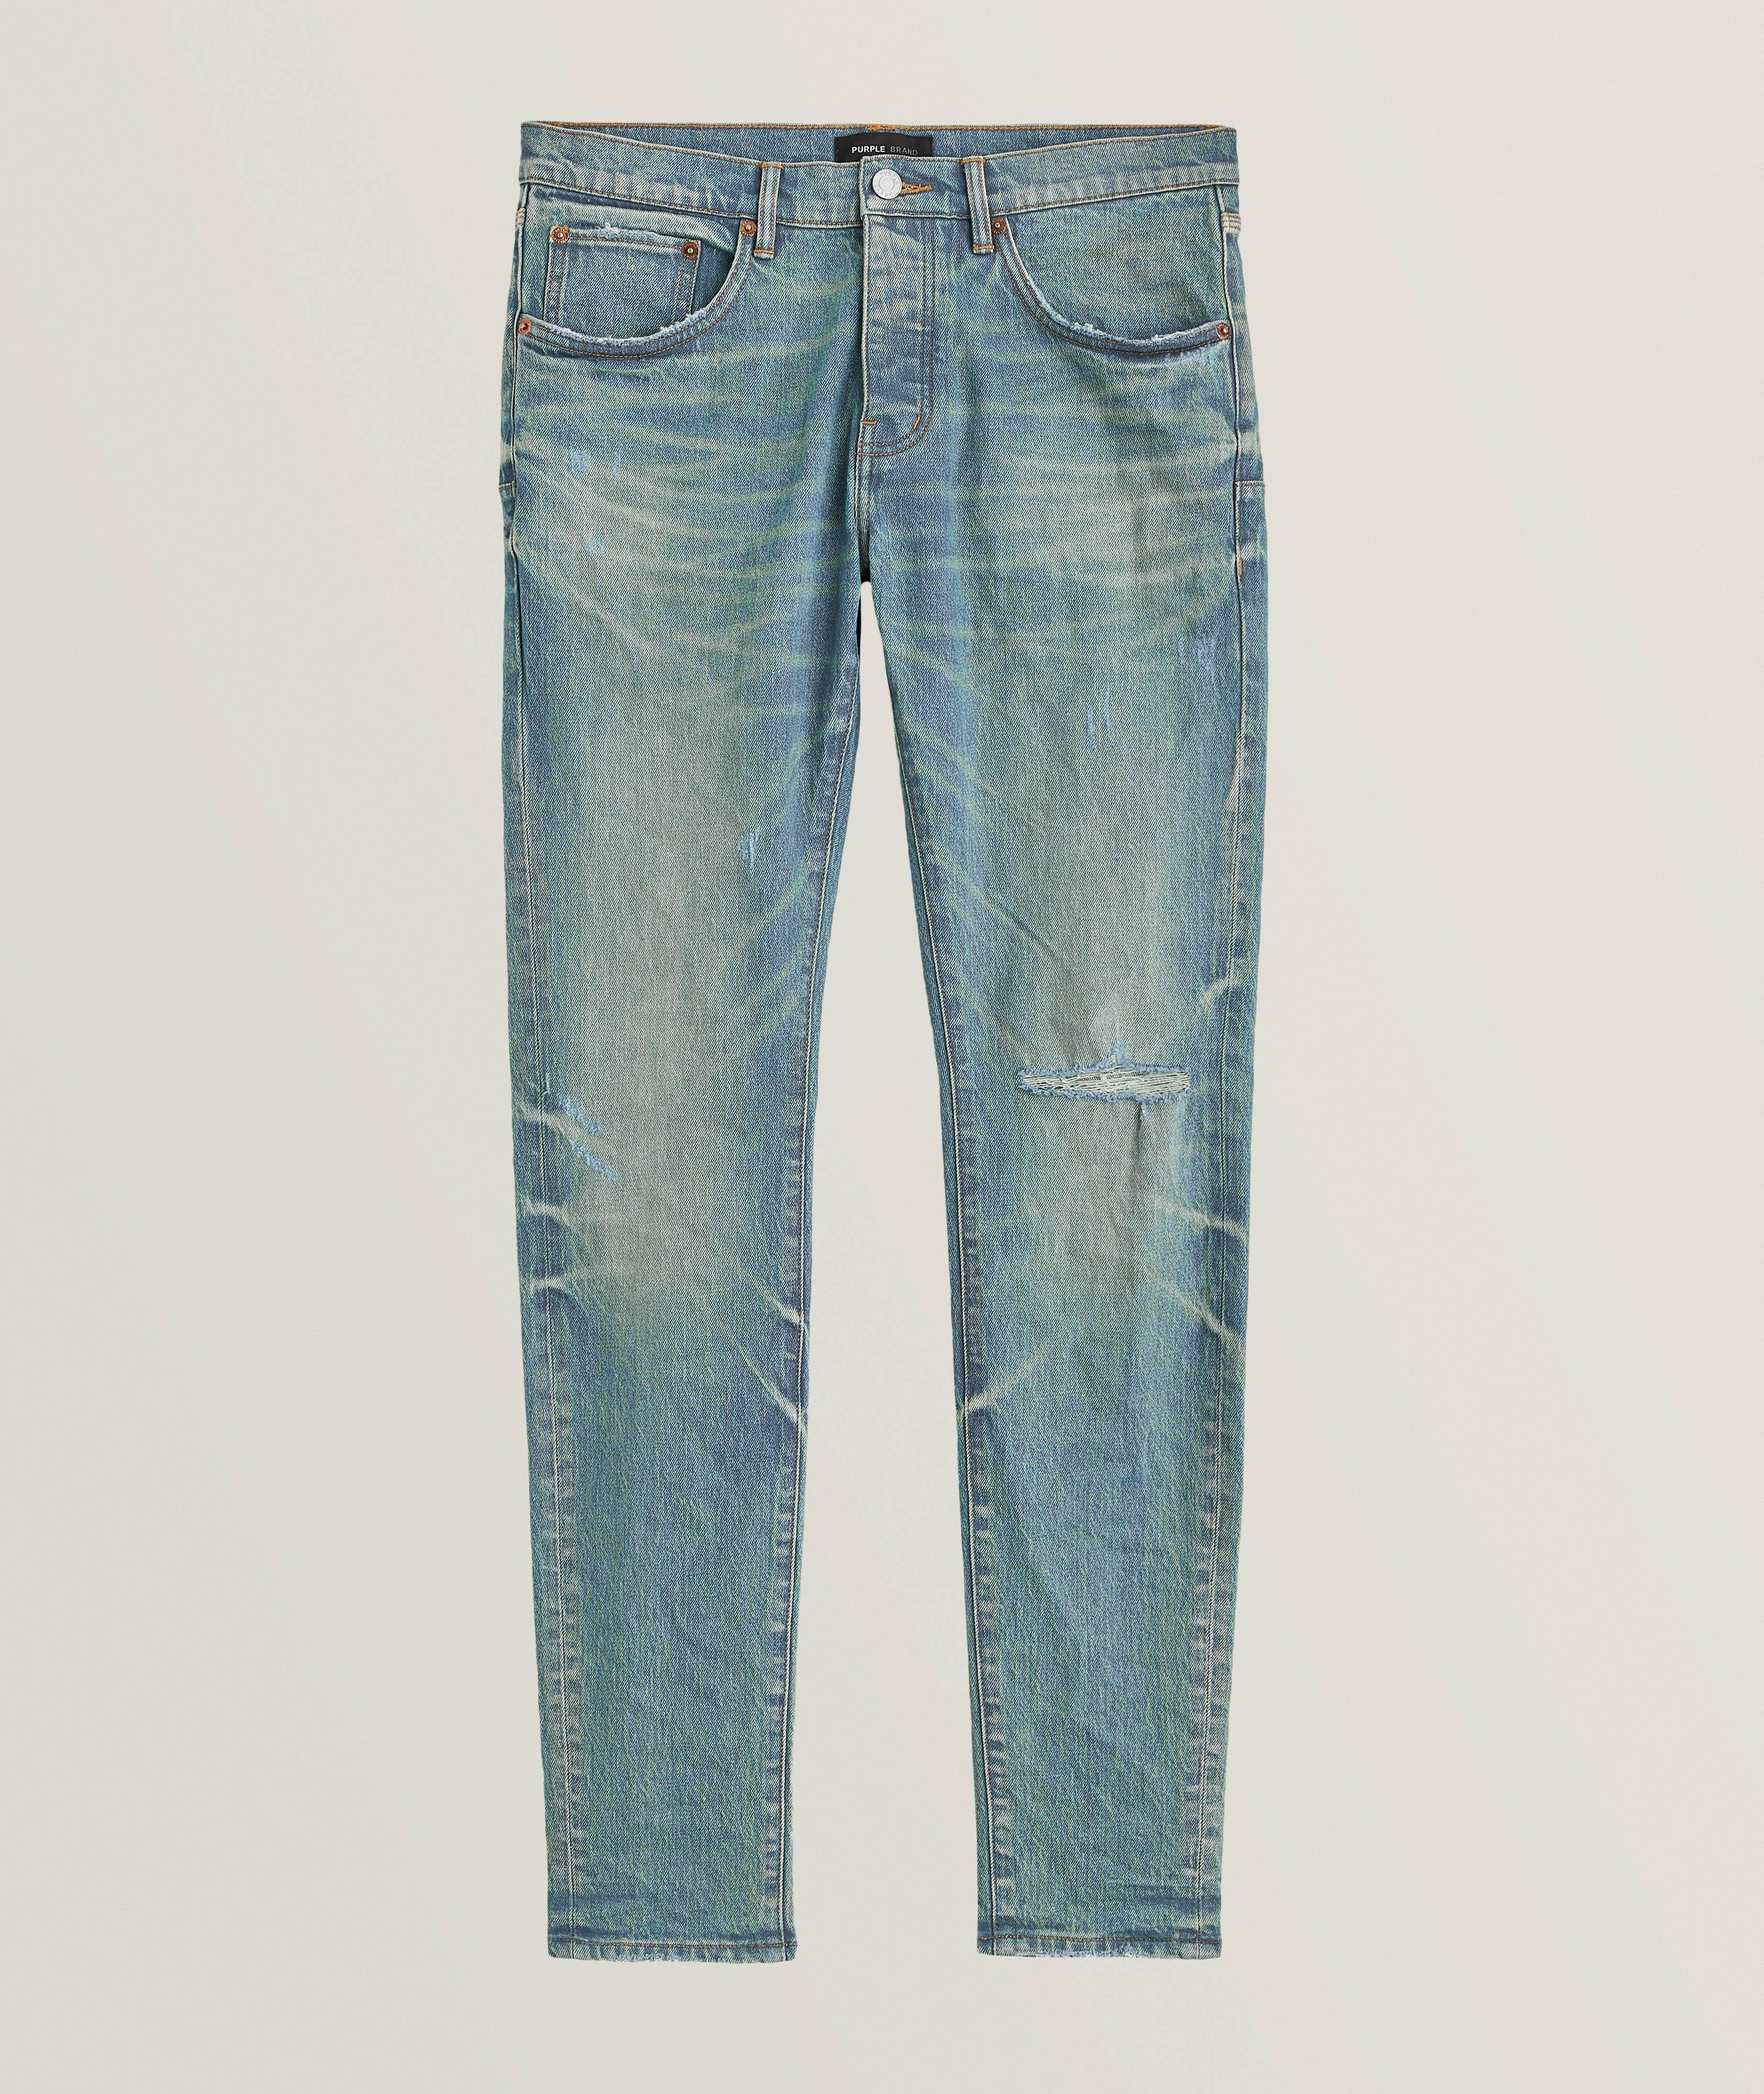 P001 Aged Ripped & Distressed Jeans